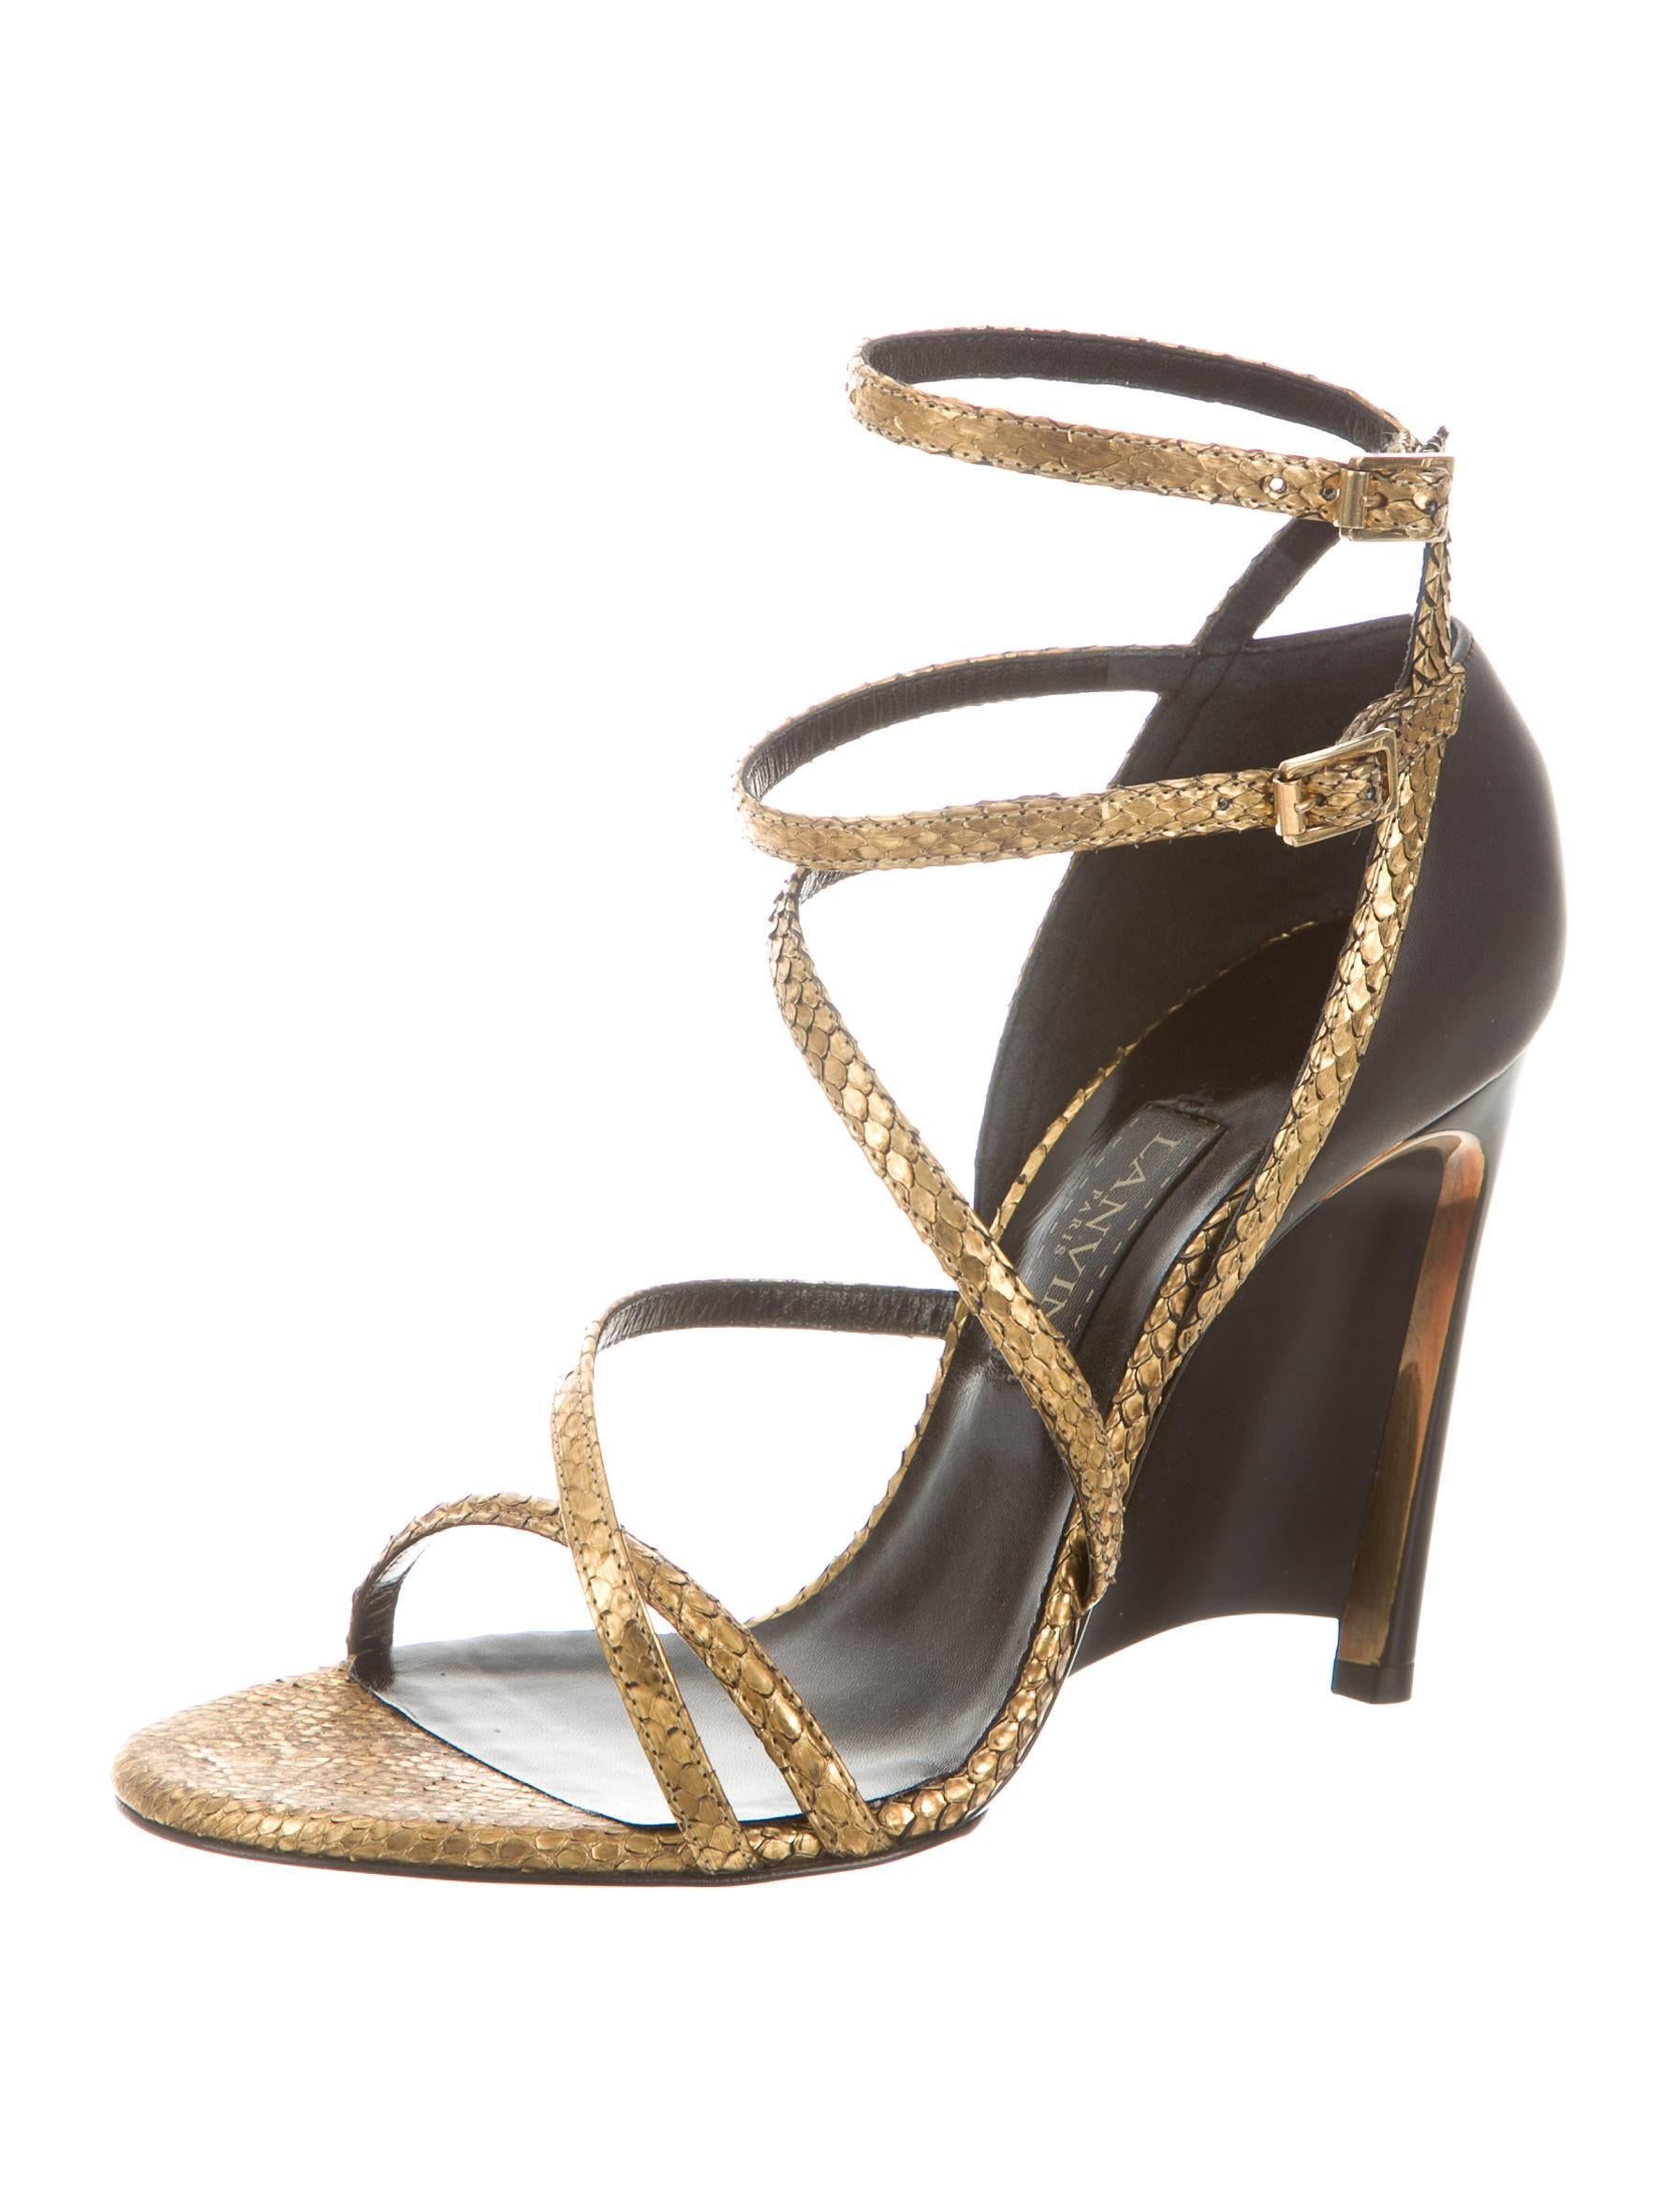 Black Lanvin New Gold Snake Brown Leather Wedge Strappy Sandals Heels